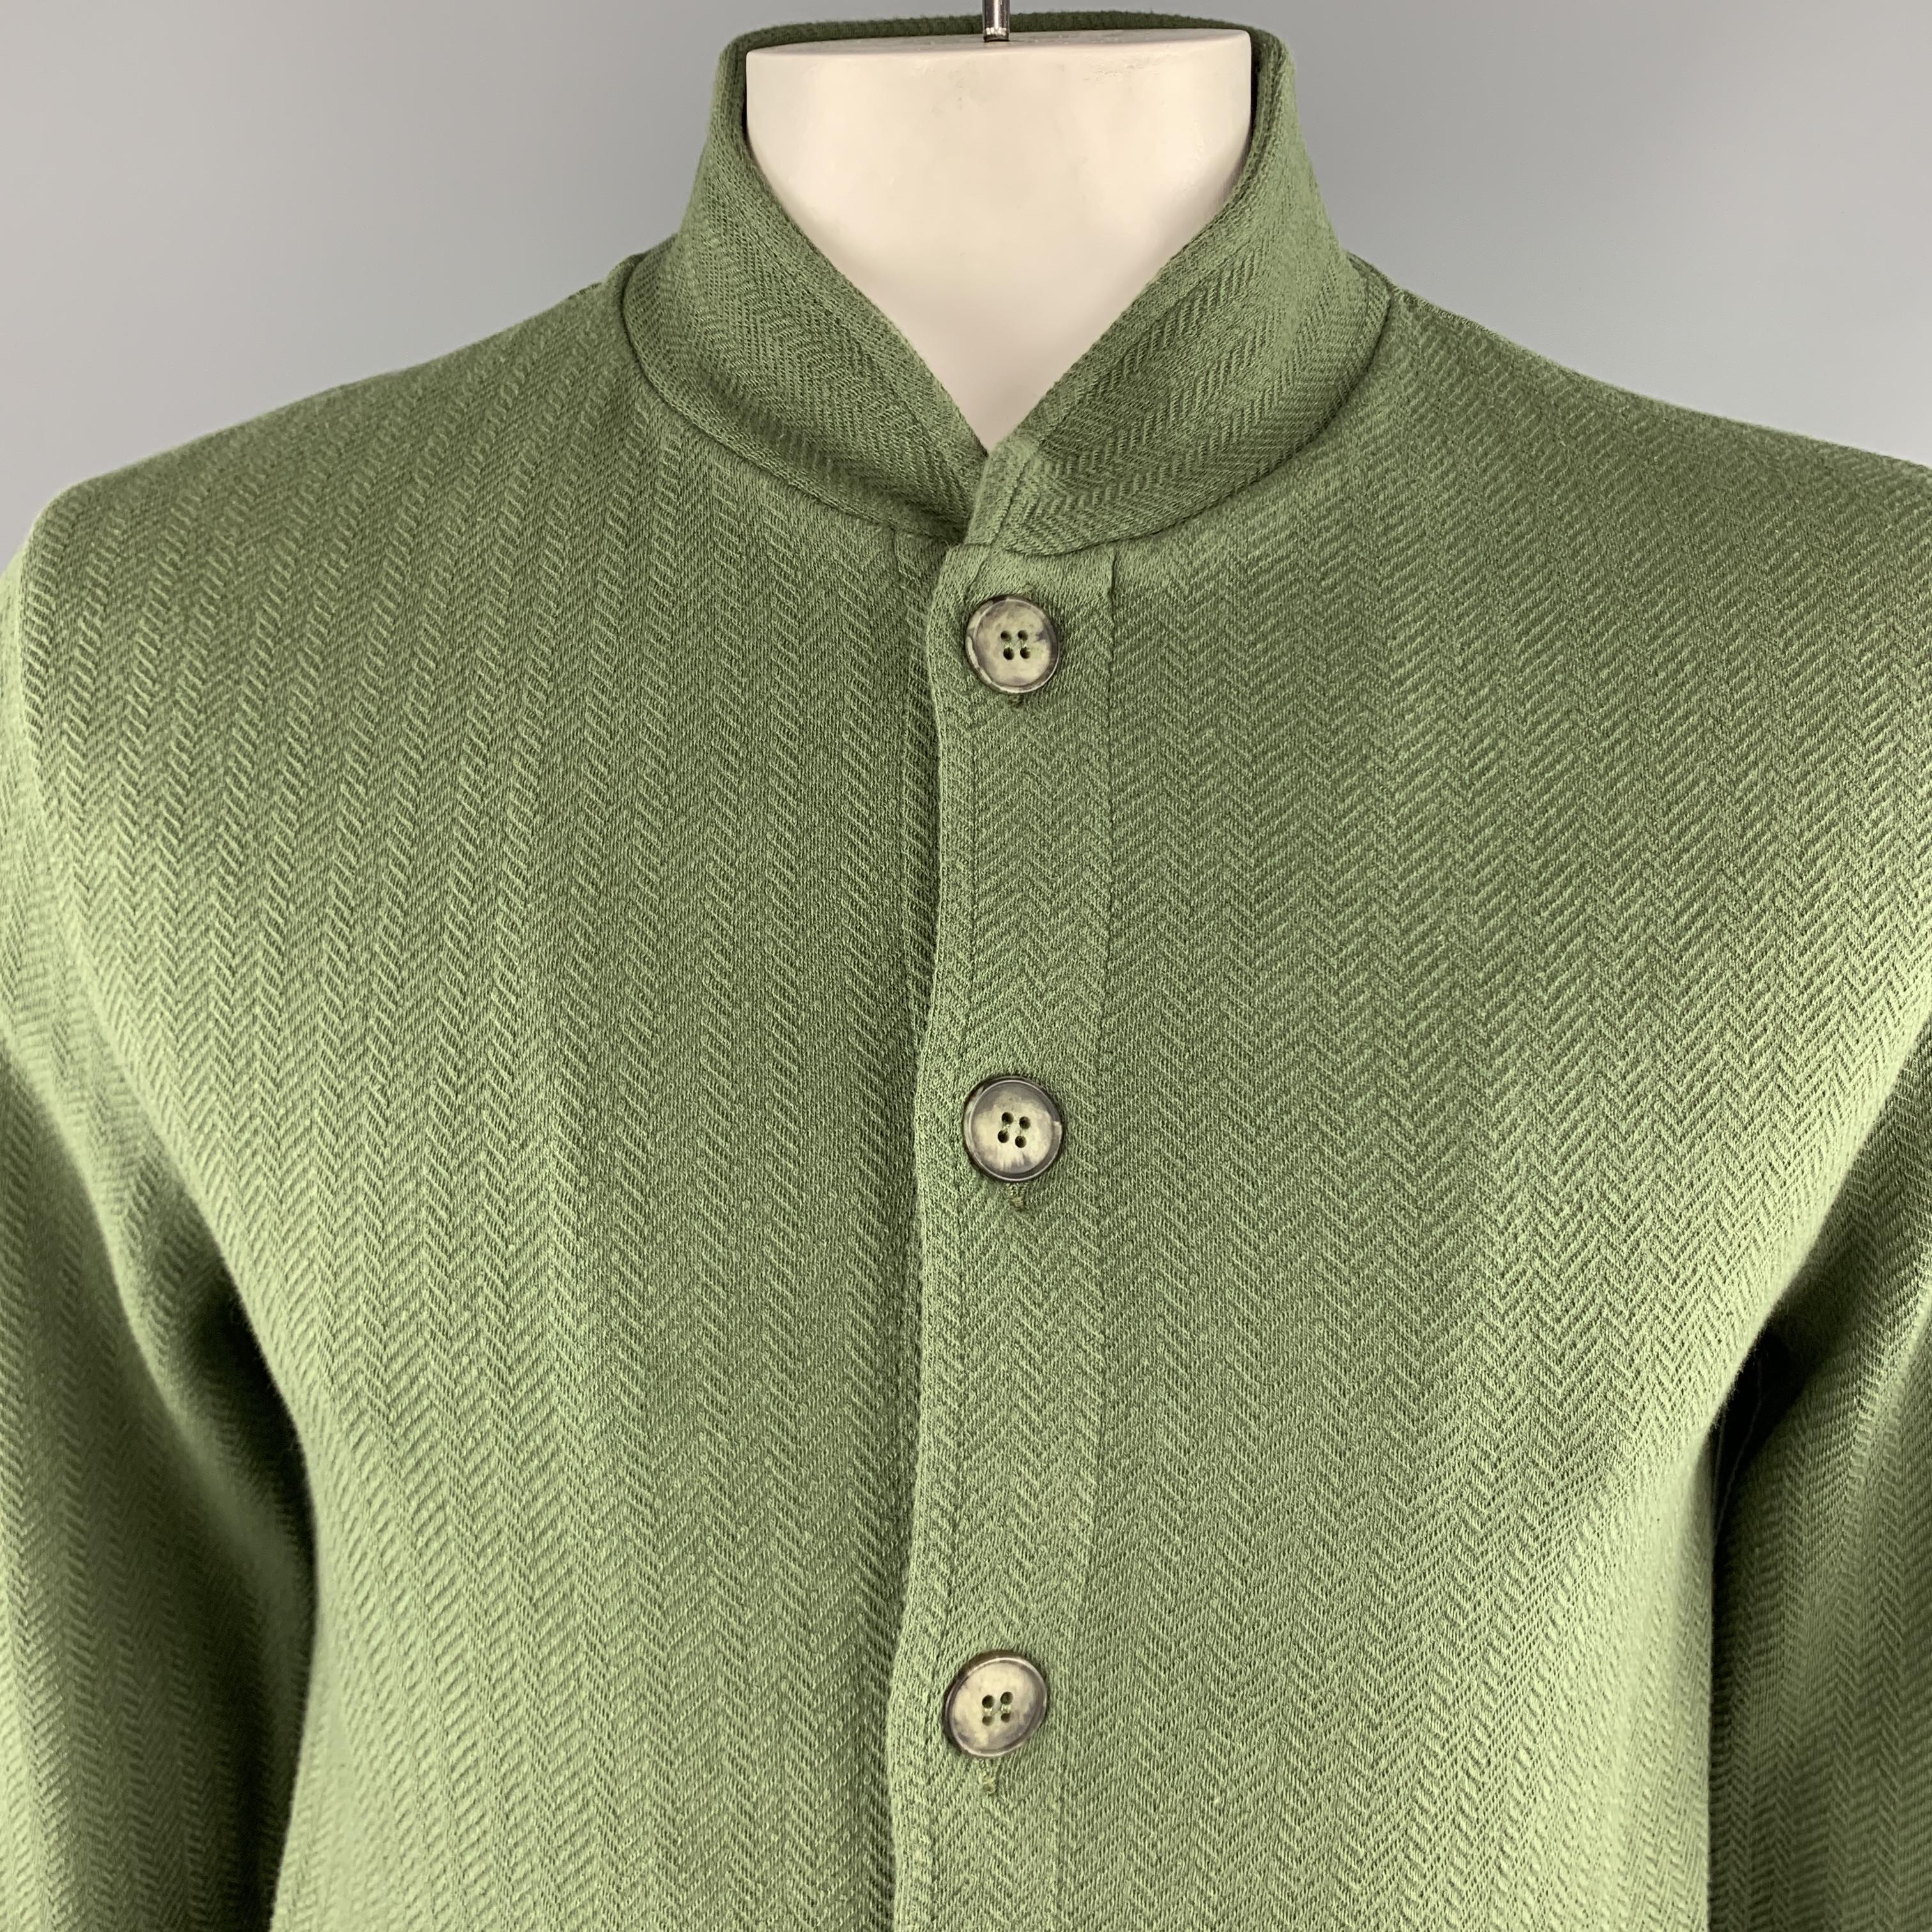 MAISON MARGIELA jacket comes in green herringbone print jersey knit with a nehru collar, button up front, slanted slit pockets, and back stitches. Made in Italy.

Excellent Pre-Owned Condition.
Marked: L

Measurements:

Shoulder: 18 in.
Chest: 42